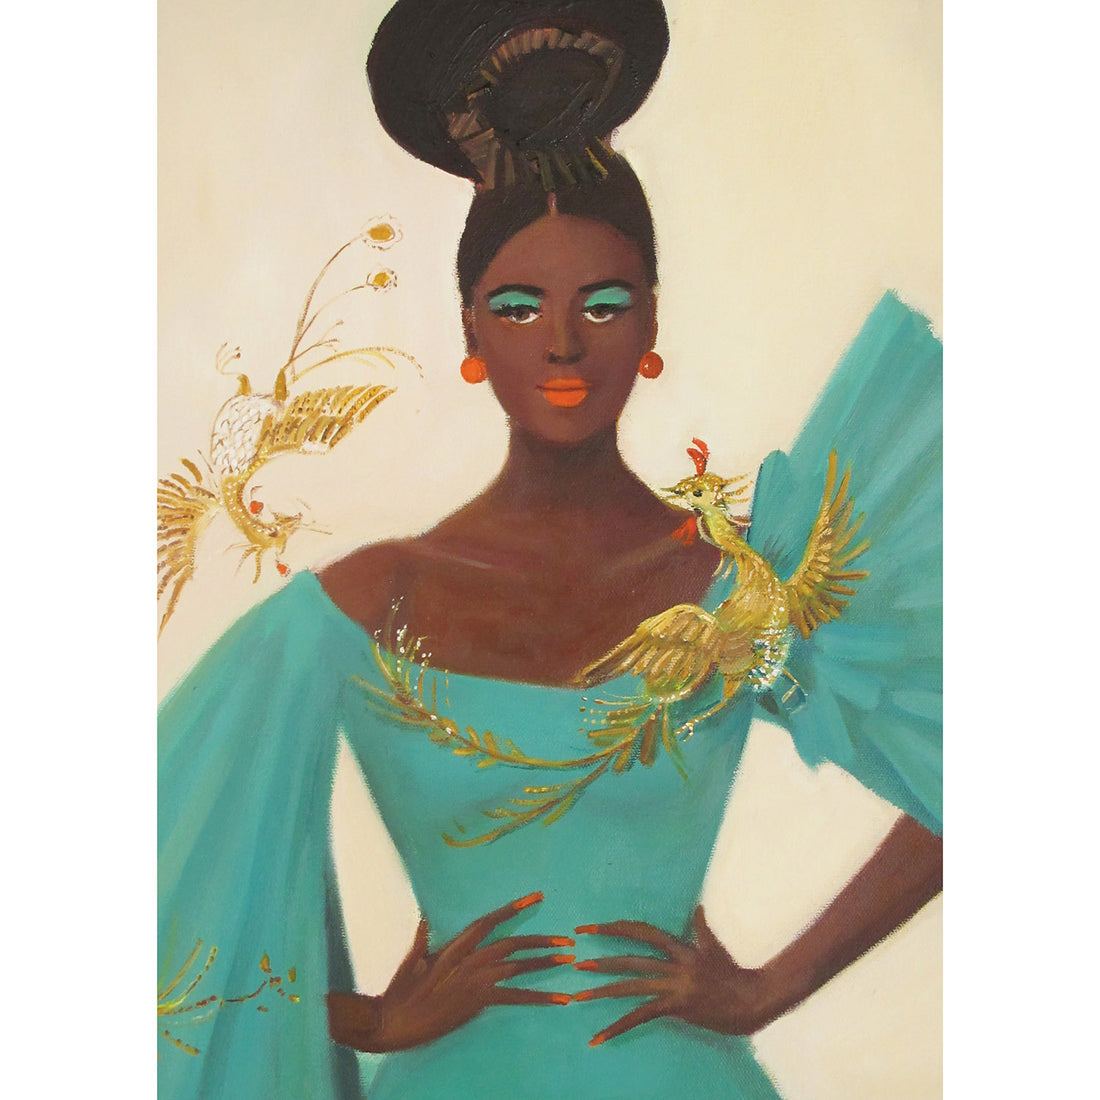 A painterly portrait of an elegant black woman in a teal dress with puffy asymmetrical sleeves accented by gold phoenix embellishments, with her hair in a tall up-do, teal eyeshadow, and orange earrings, lipstick and nail polish. 